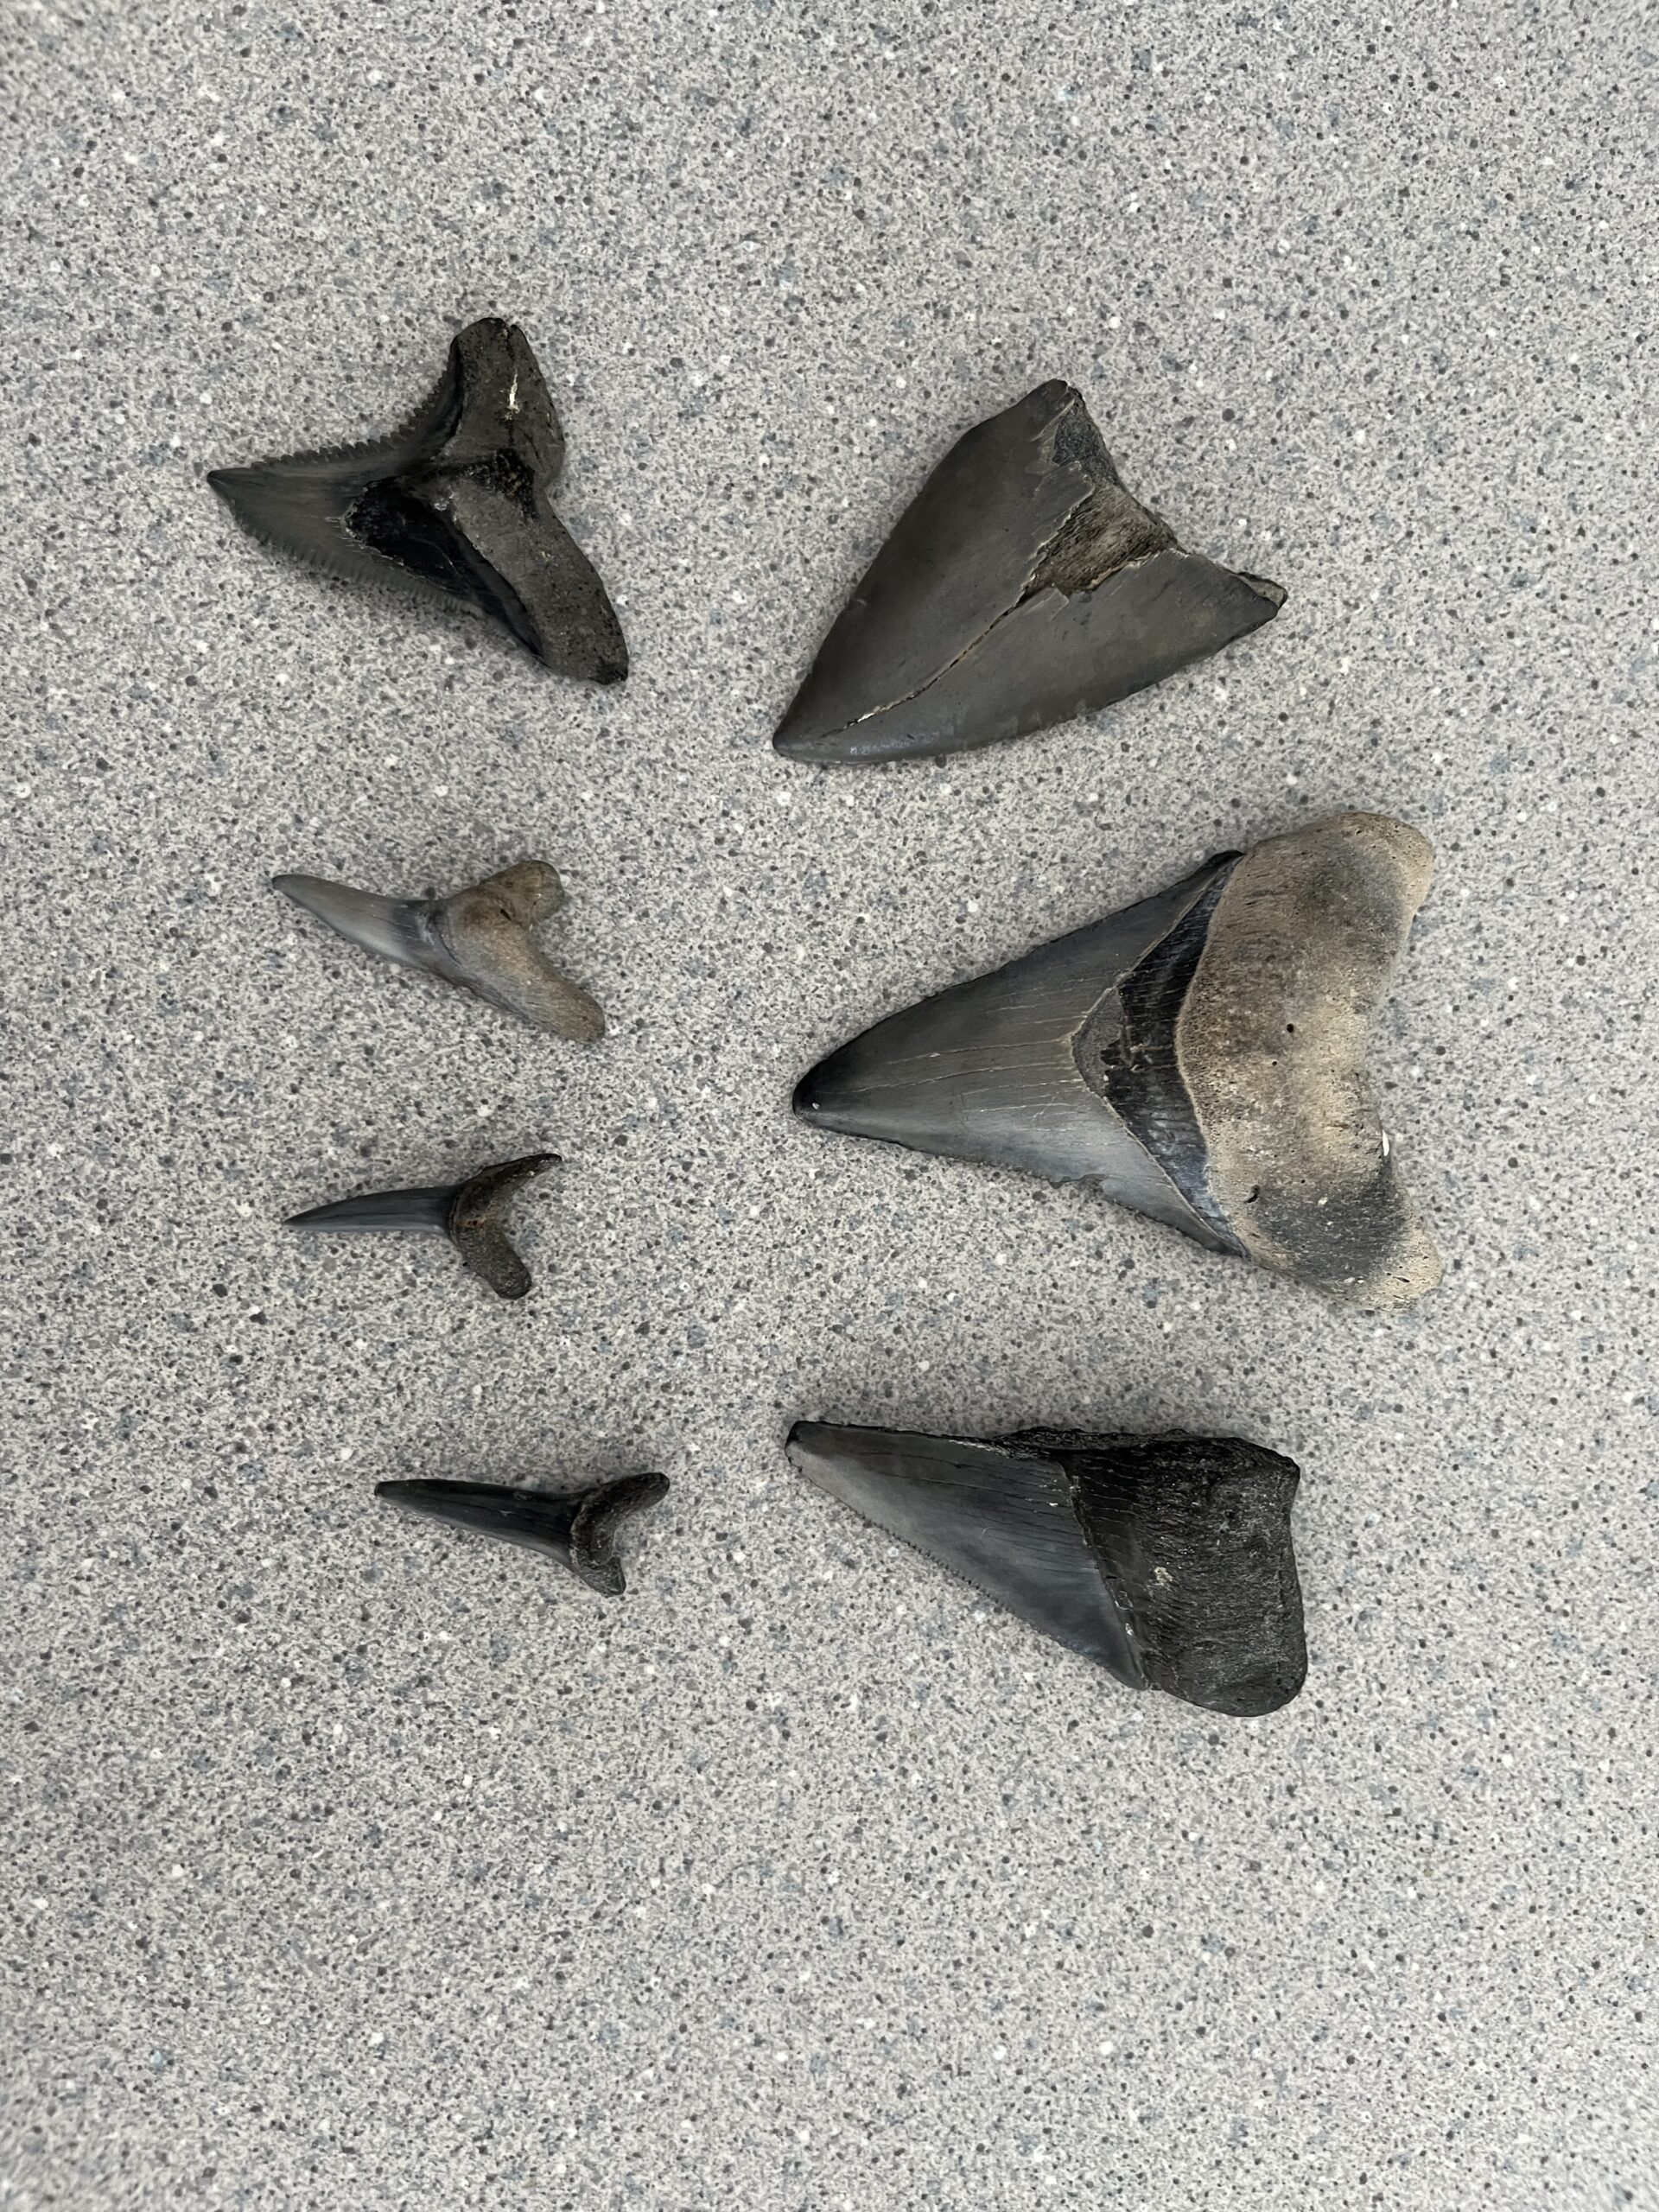 dive for fossil sharks teeth